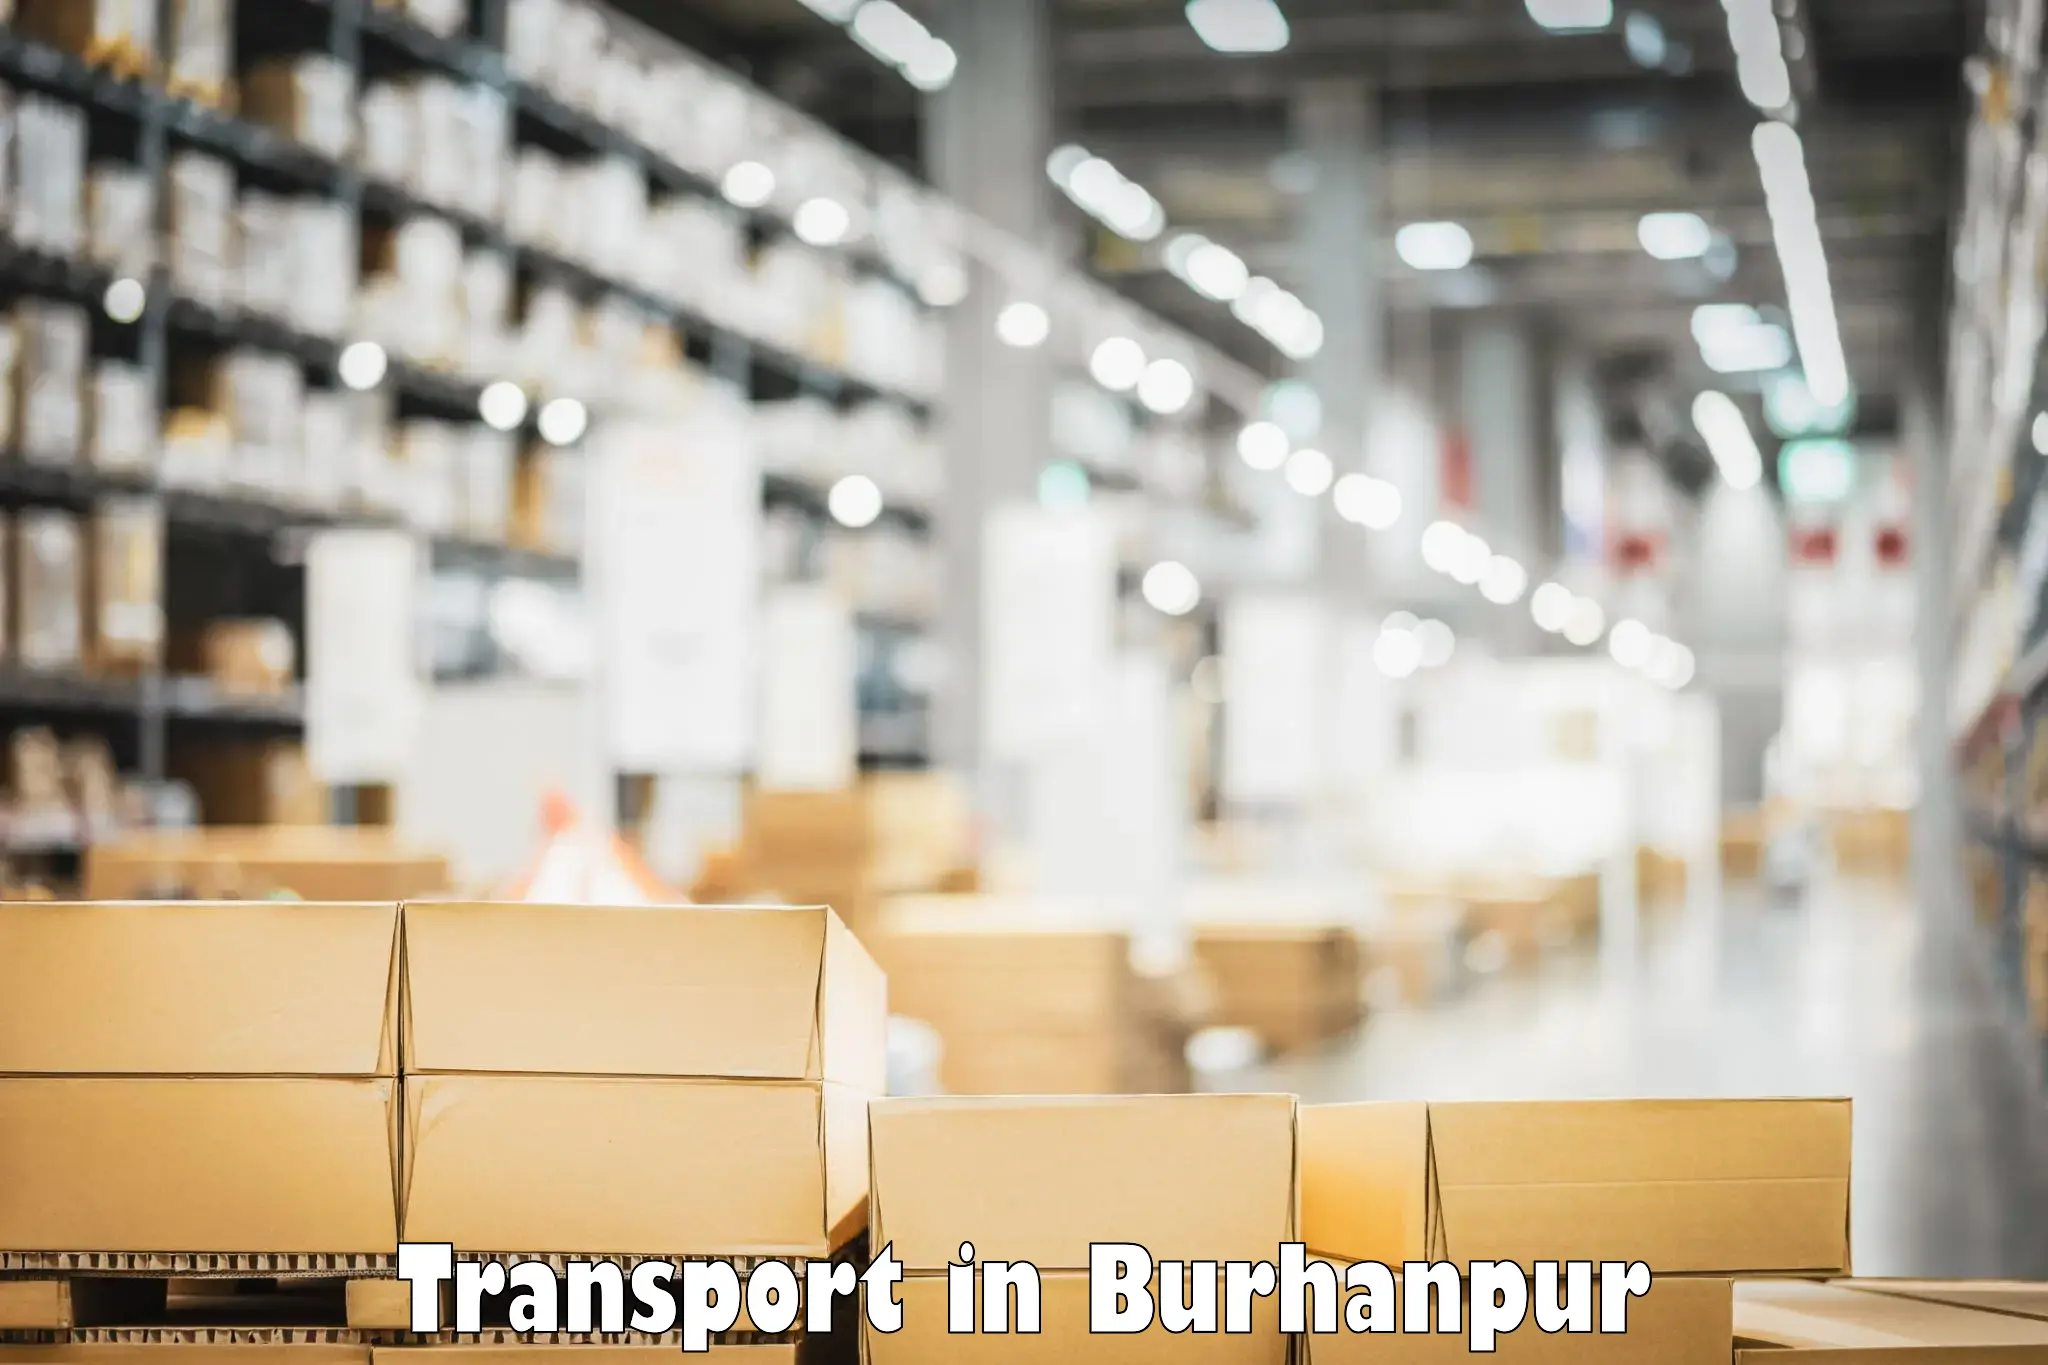 Vehicle transport services in Burhanpur